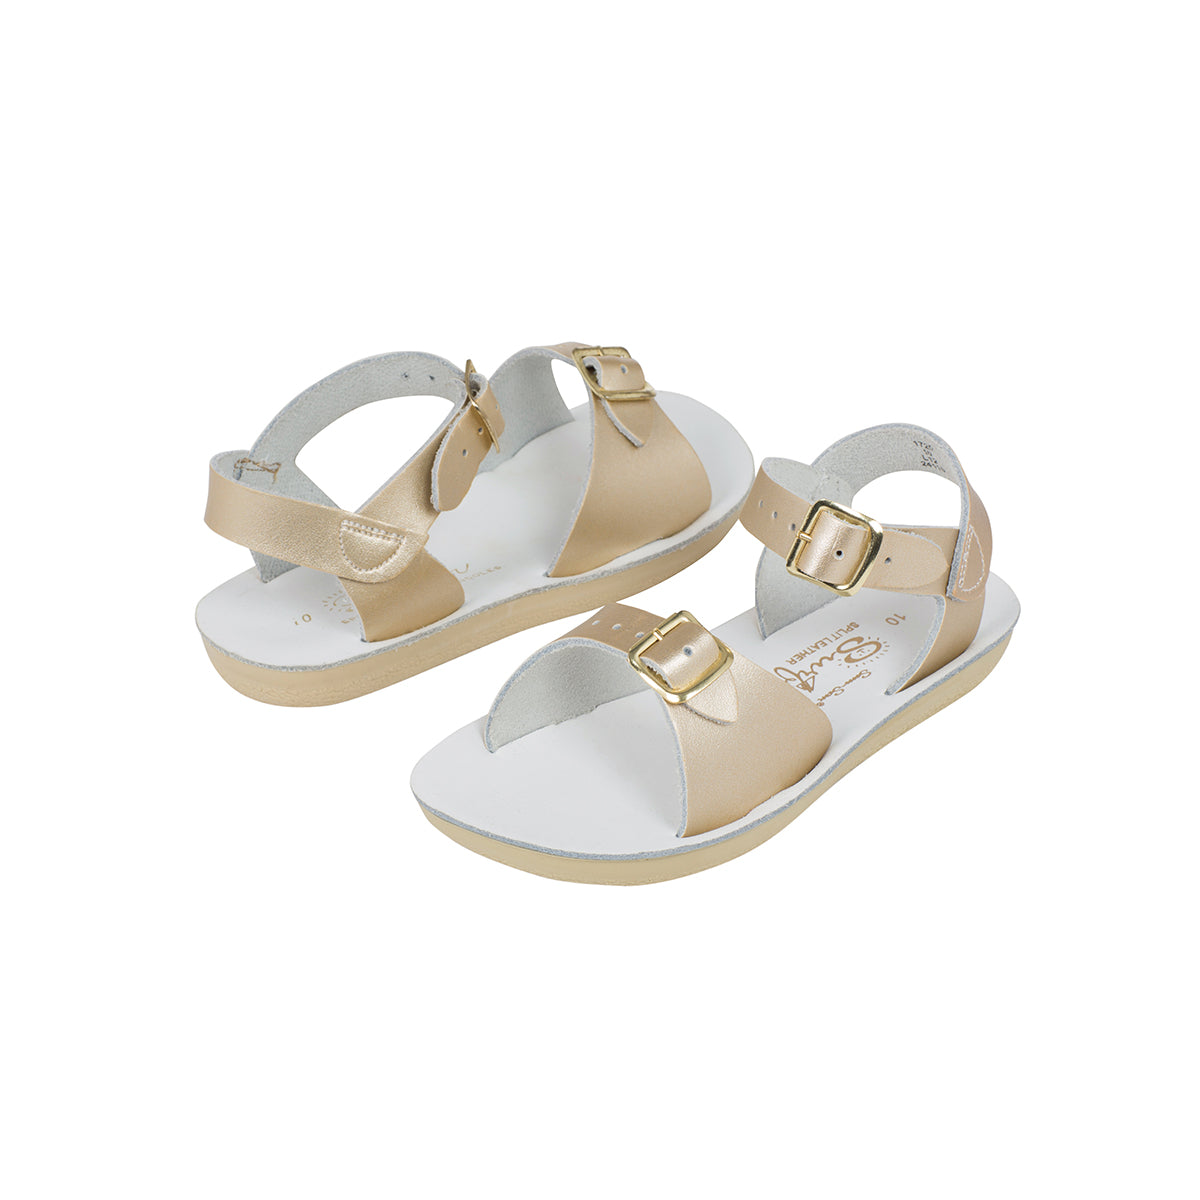 Surfer Sandals in Gold by Salt-Water - Last Ones In Stock - SS 6-7 / E ...